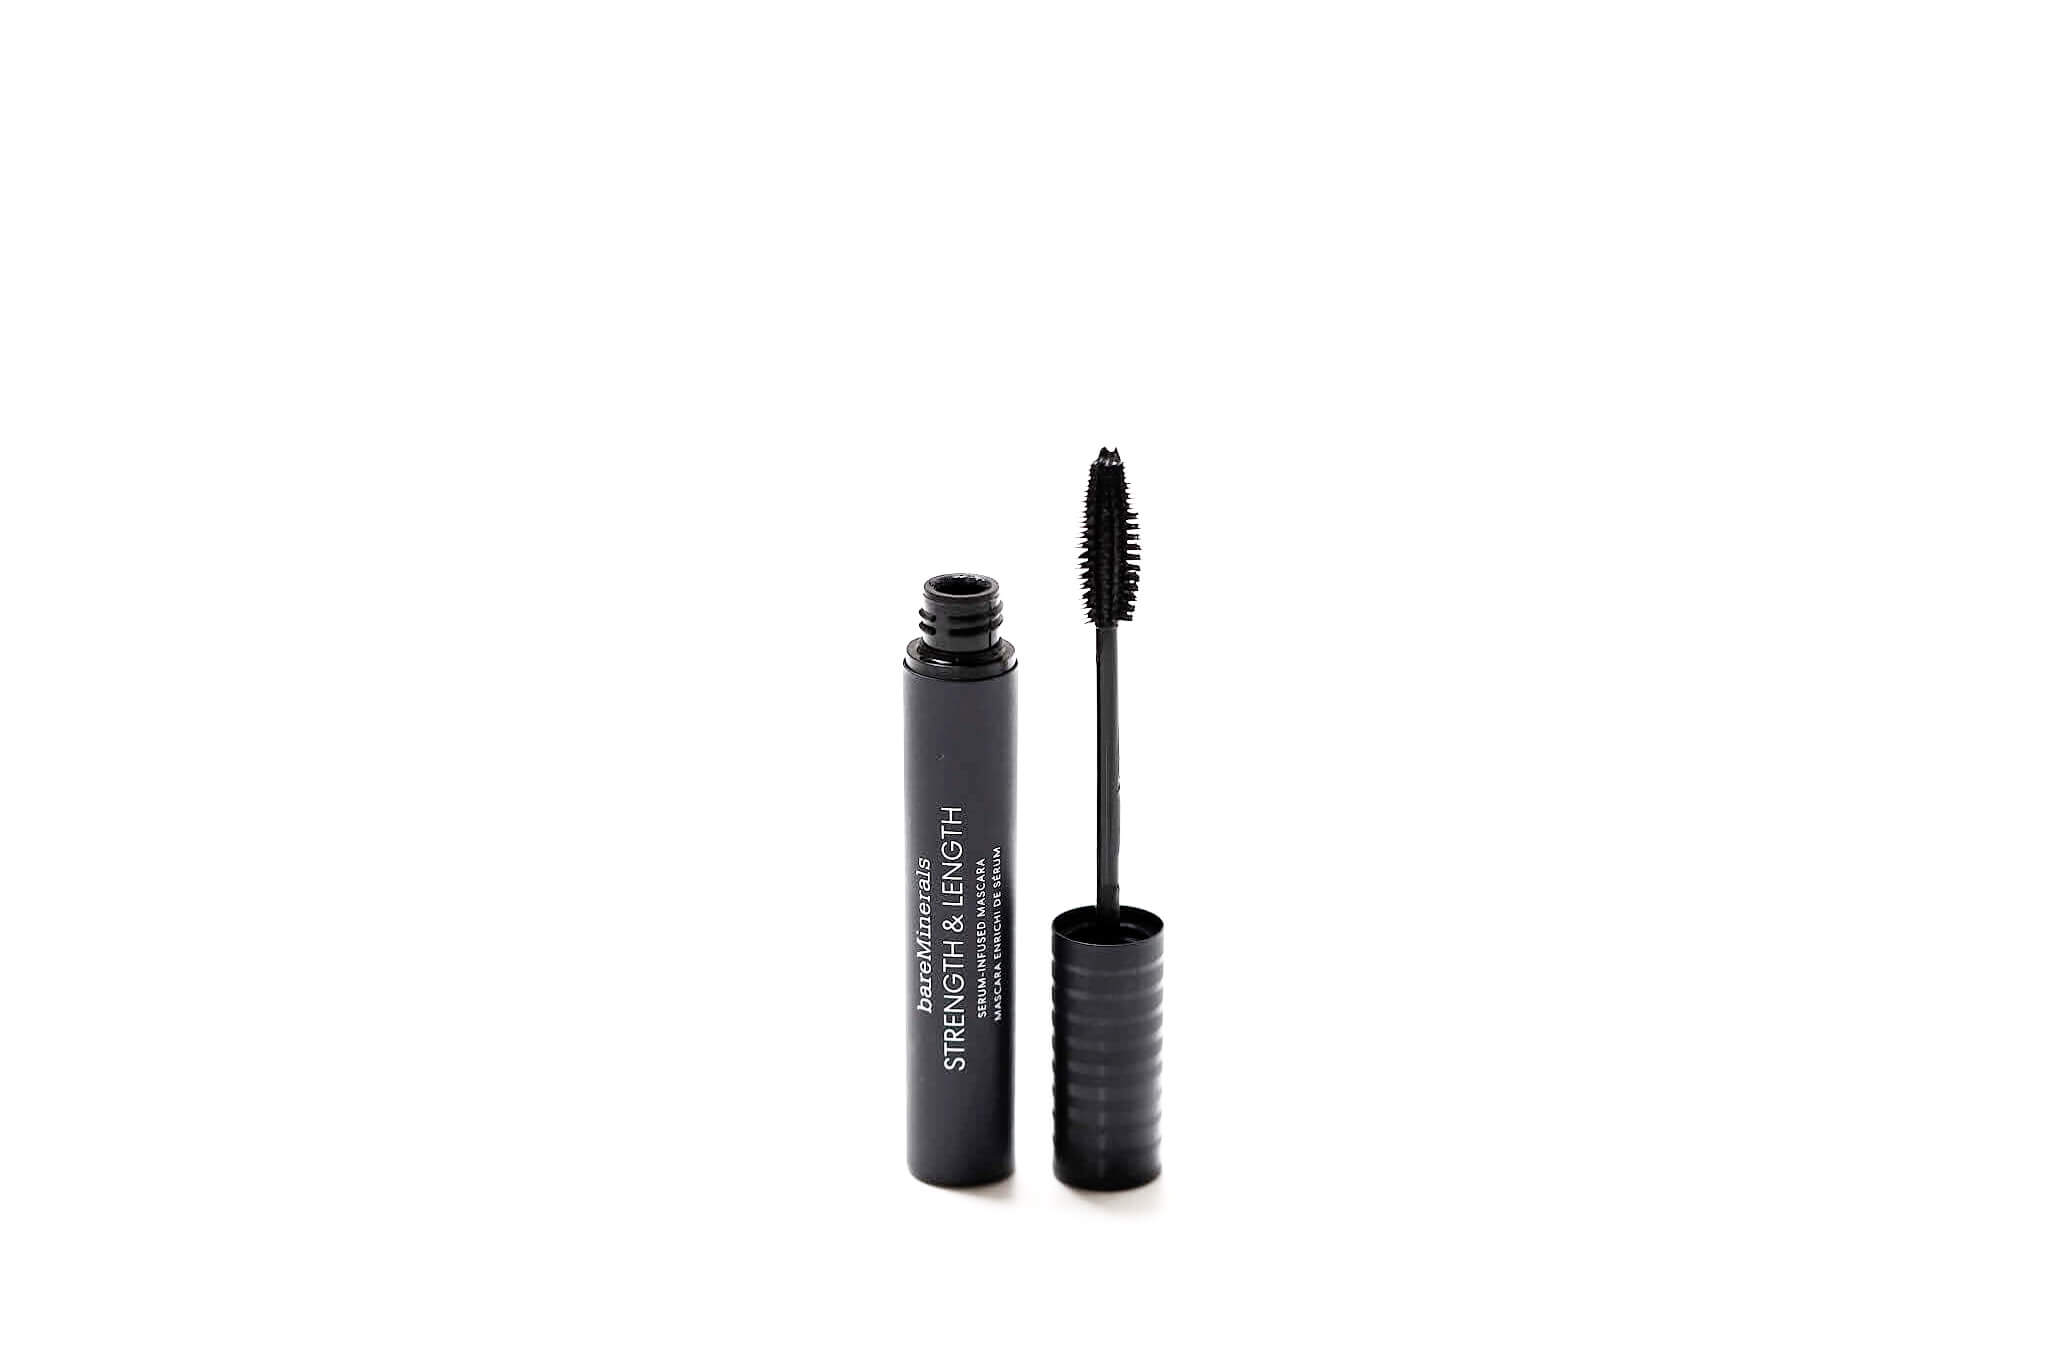 bareMinerals mascara strenght lenght